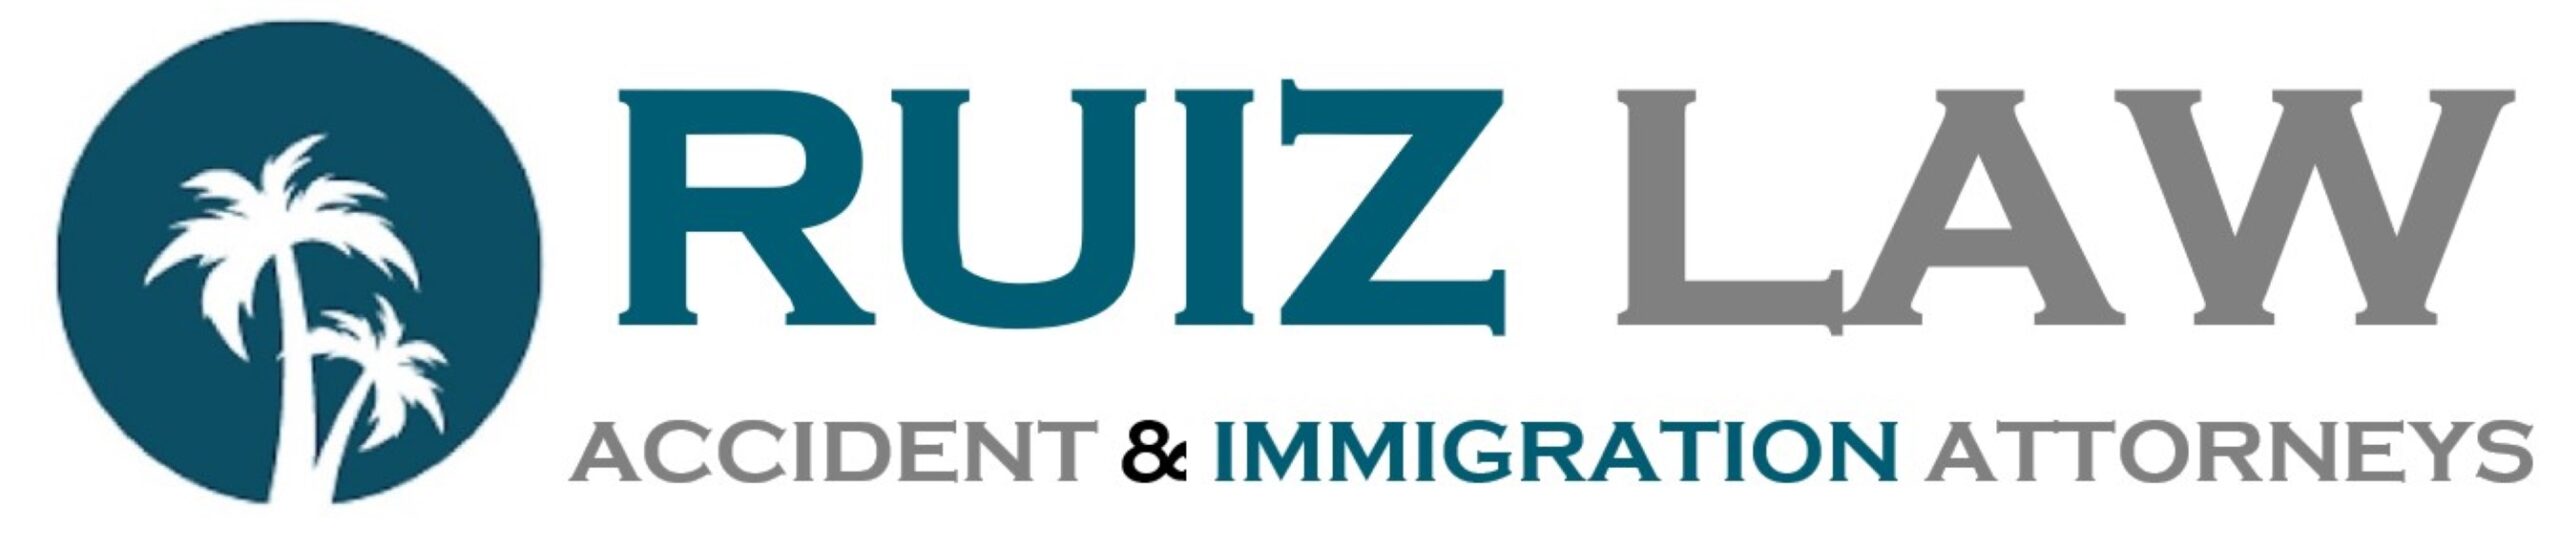 RUIZ LAW – ACCIDENT & IMMIGRATION LAWYERS